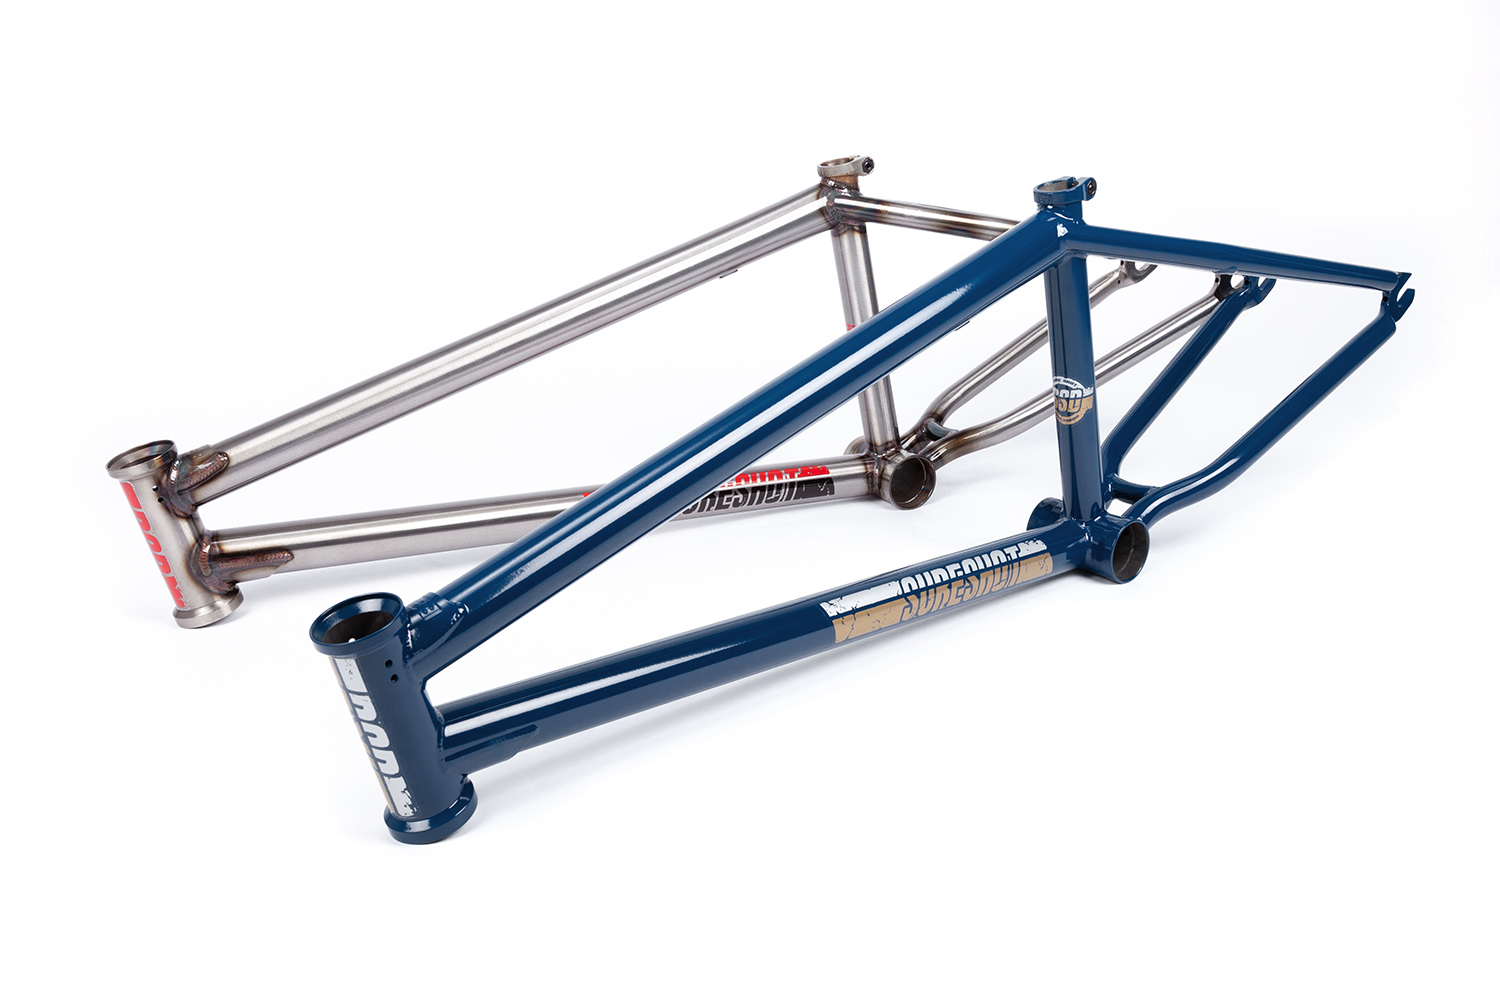 The 2020 BSD Sureshot Frame available now!